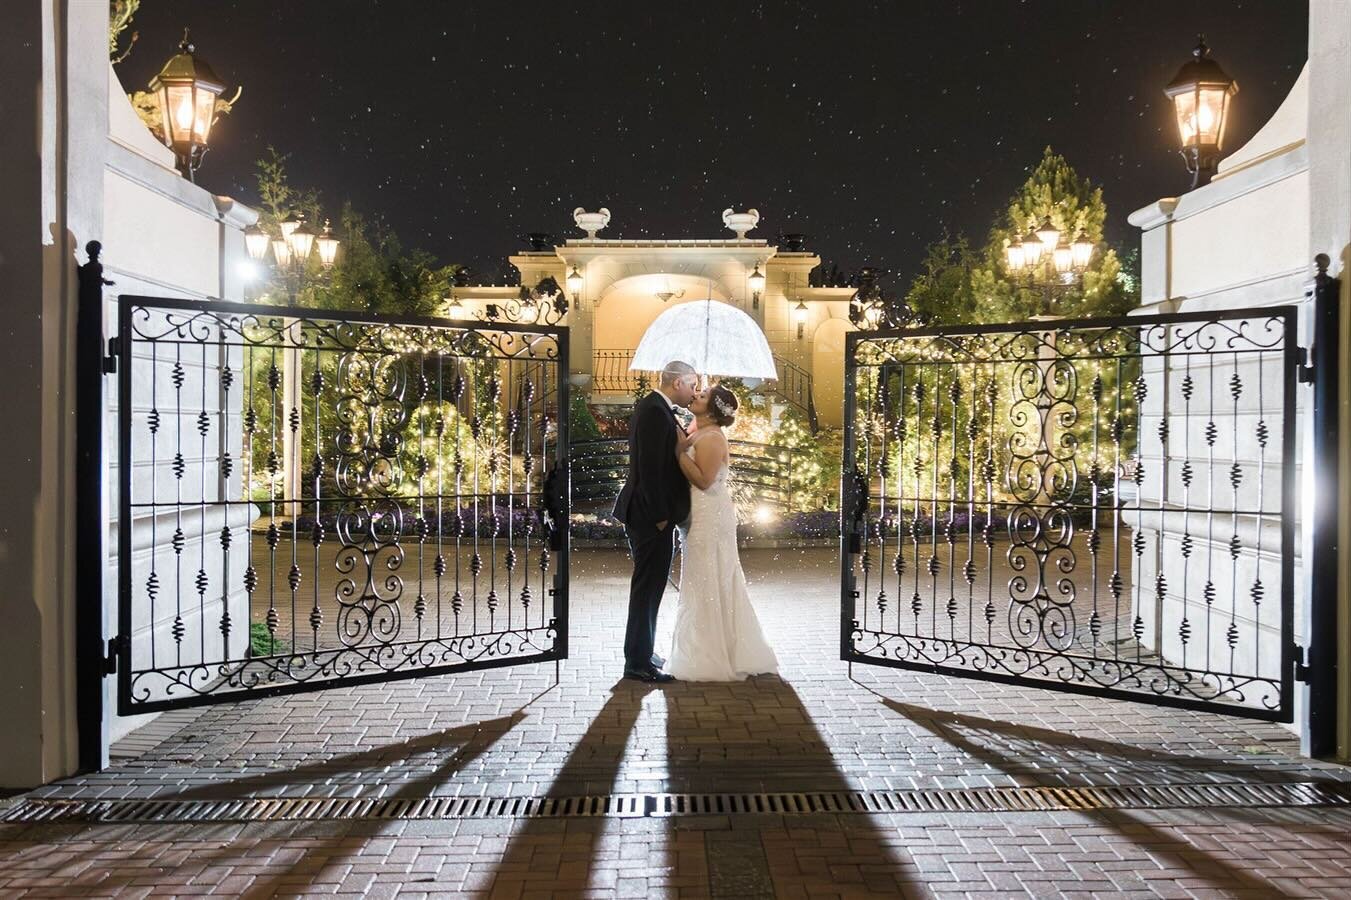 Attention: Rainy Day Brides - This is your sign to get that night 📸 no matter what. You won&rsquo;t regret it !! 
.
.
#rainwedding #rainphotography #canonphotography #weddingphotography #nightshot #highendweddings #bestofweddings #weddingideas #newy